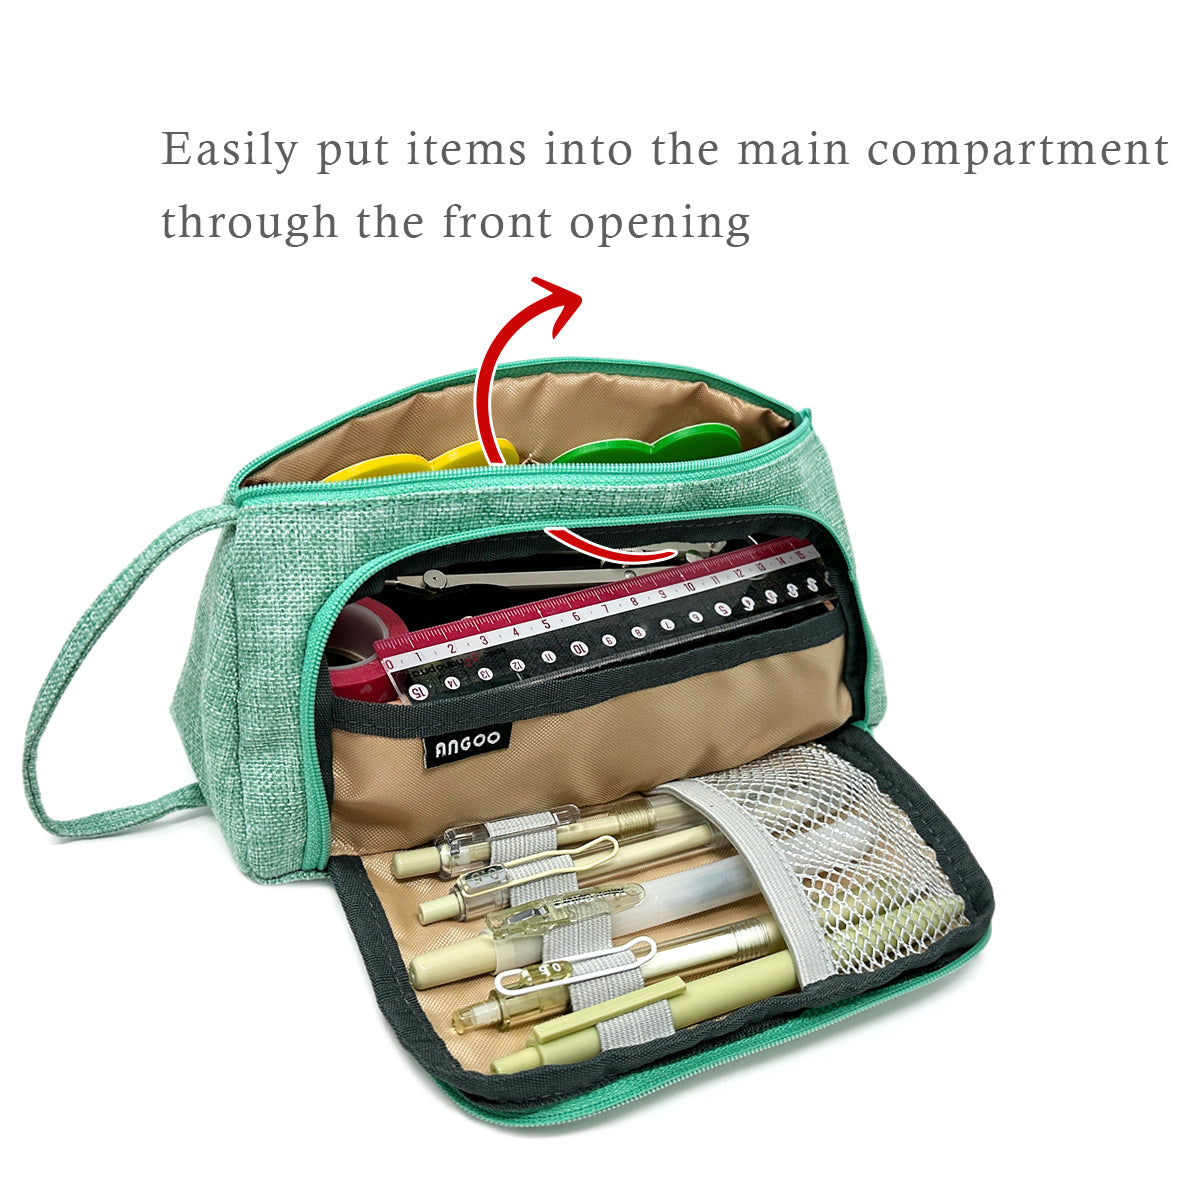 Pencil Case Grid Pencil Pouch with 3 Compartments Stationery Bag